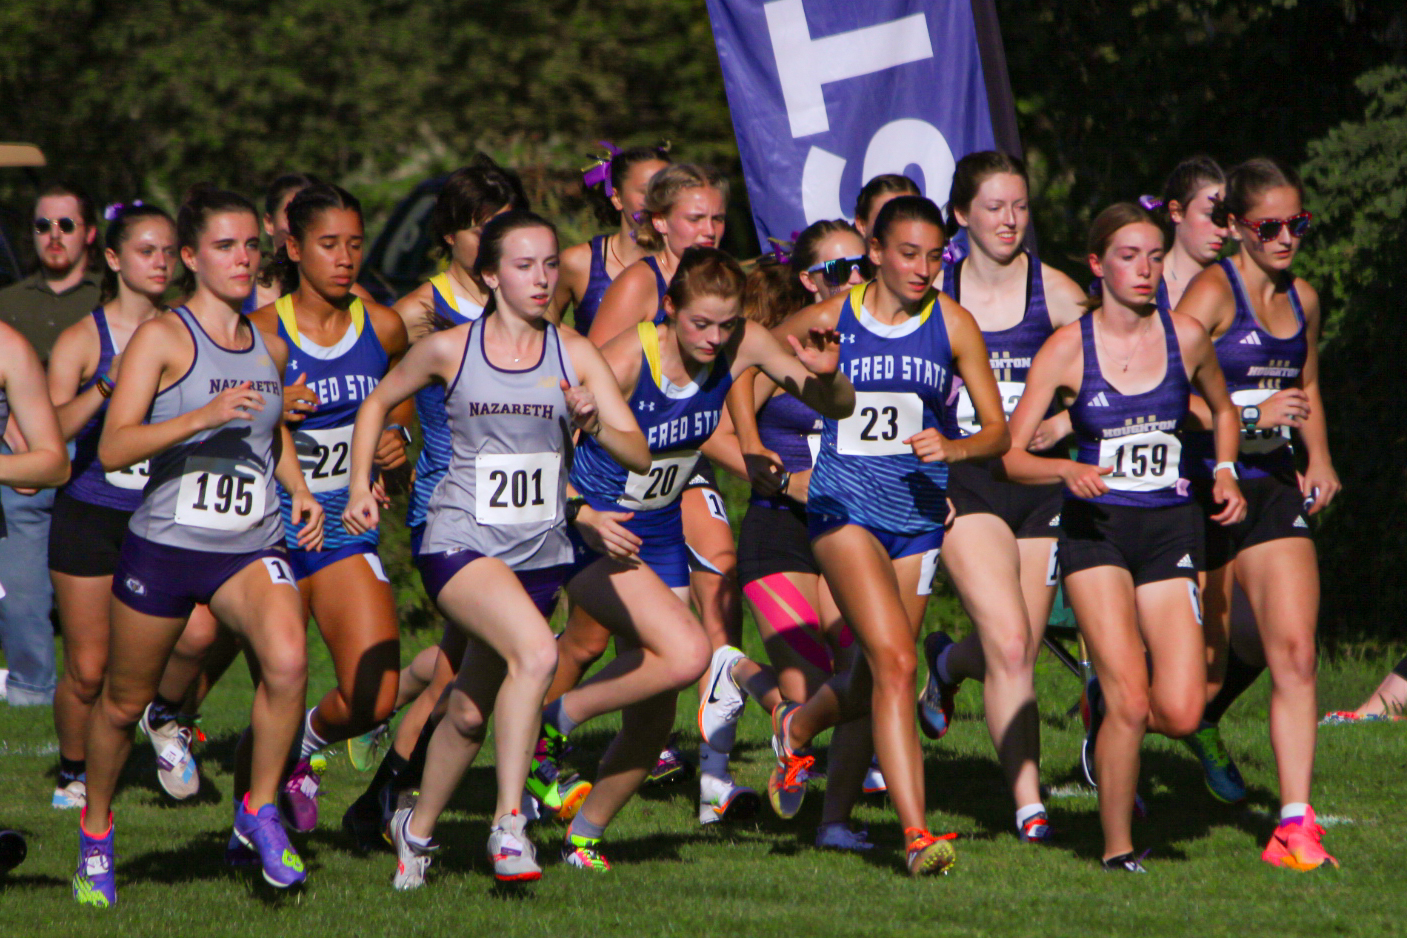 Women's Notches A Top-10 Finish